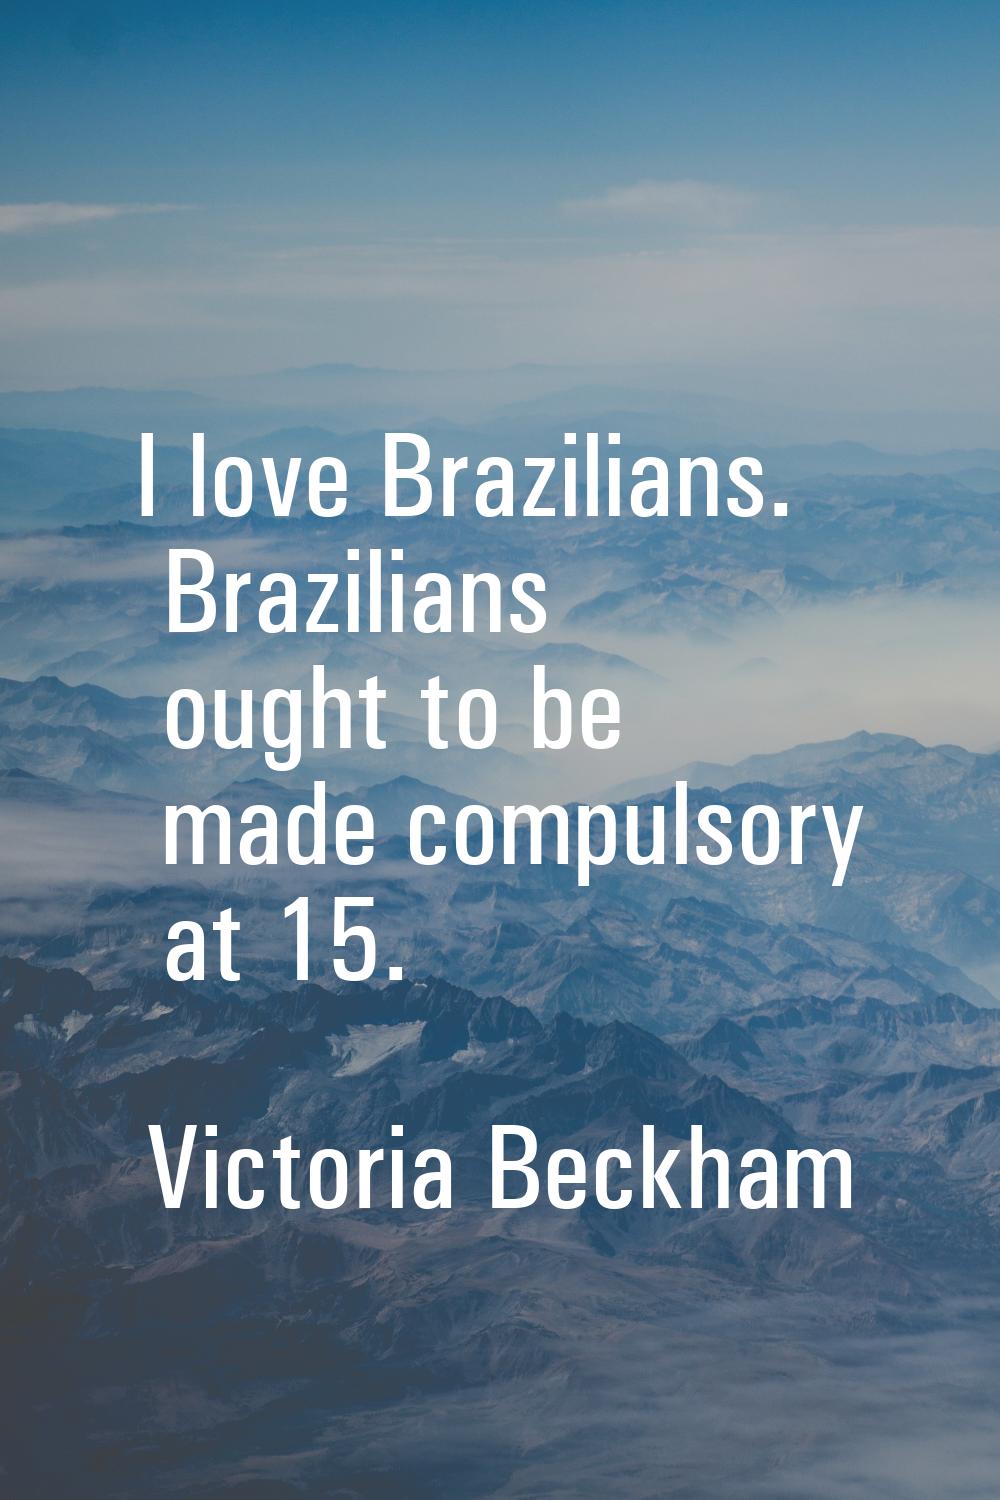 I love Brazilians. Brazilians ought to be made compulsory at 15.